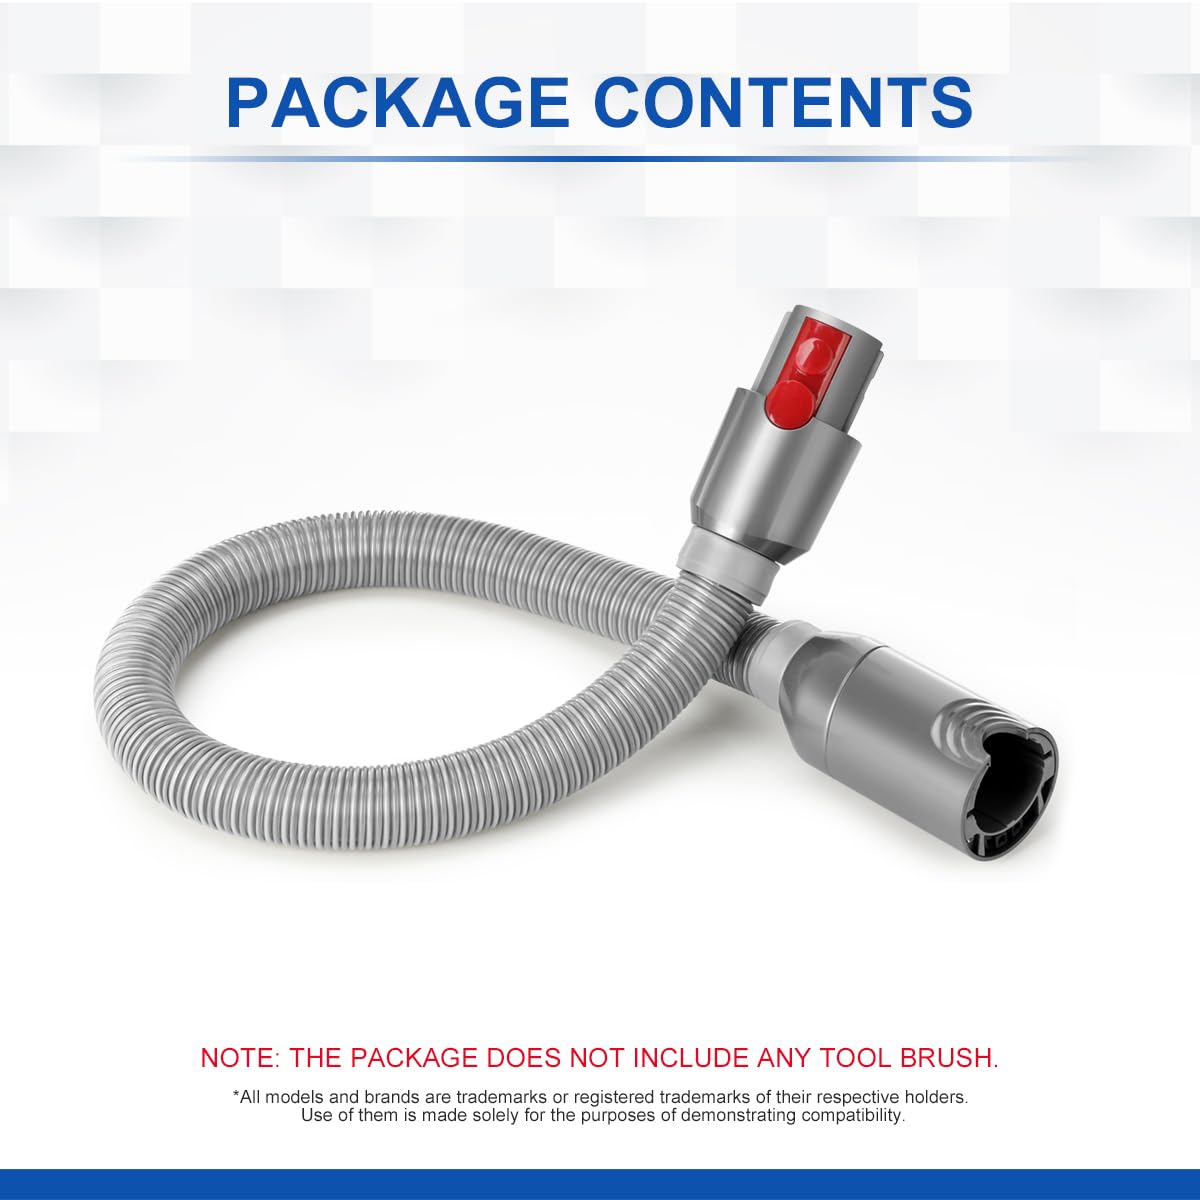 LANMU Extension Hose with Power package contents